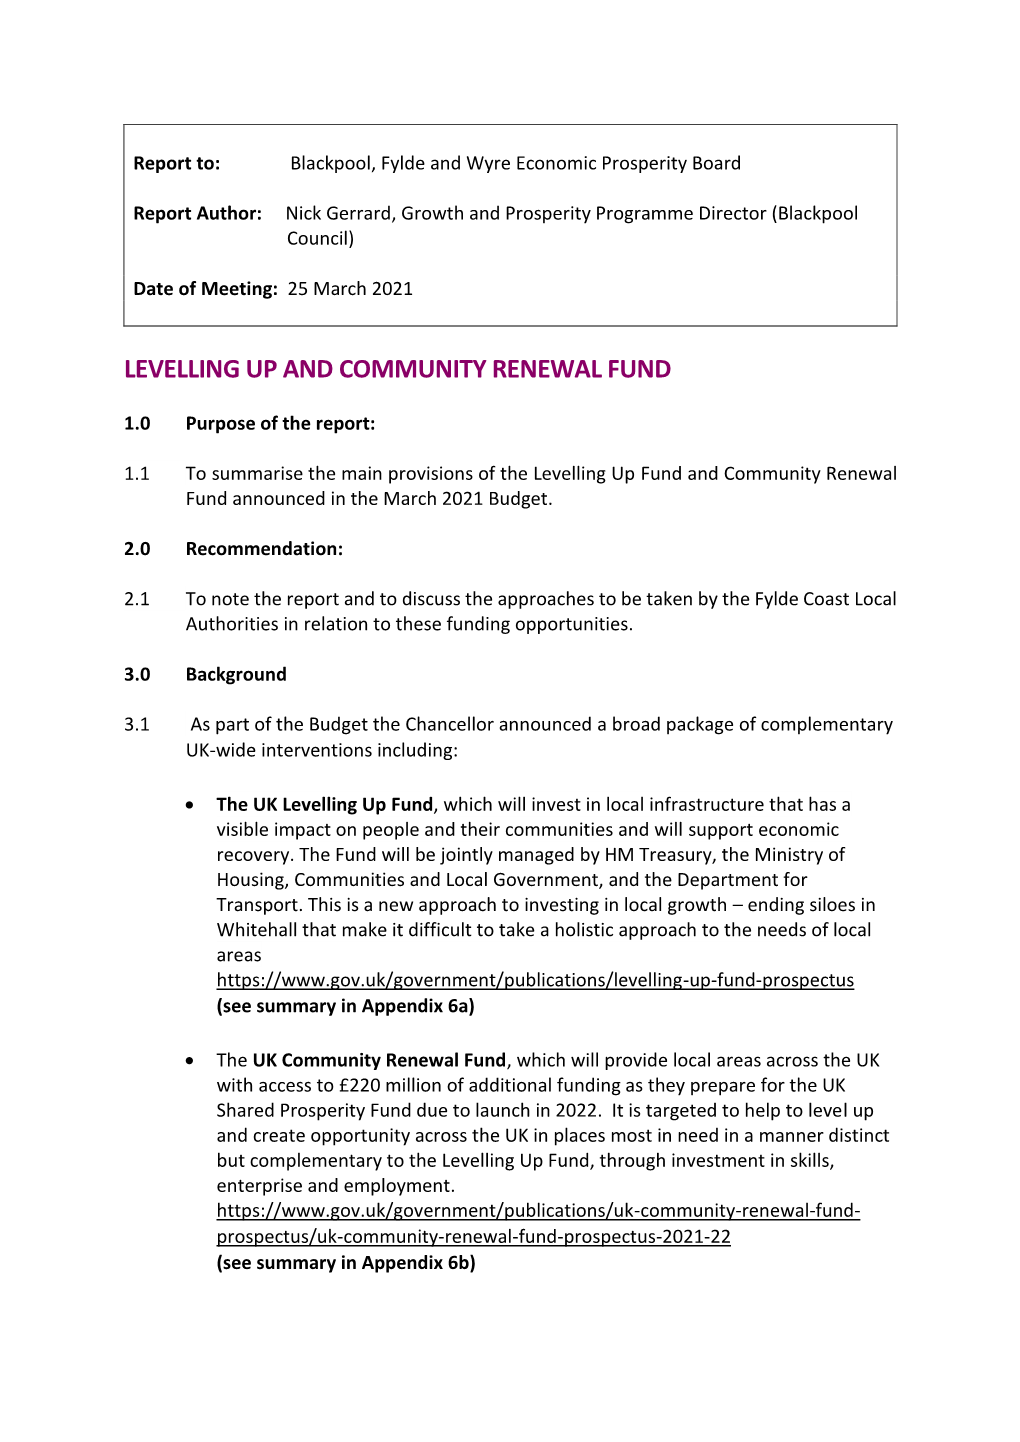 Levelling up and Community Renewal Fund Pdf 233 Kb